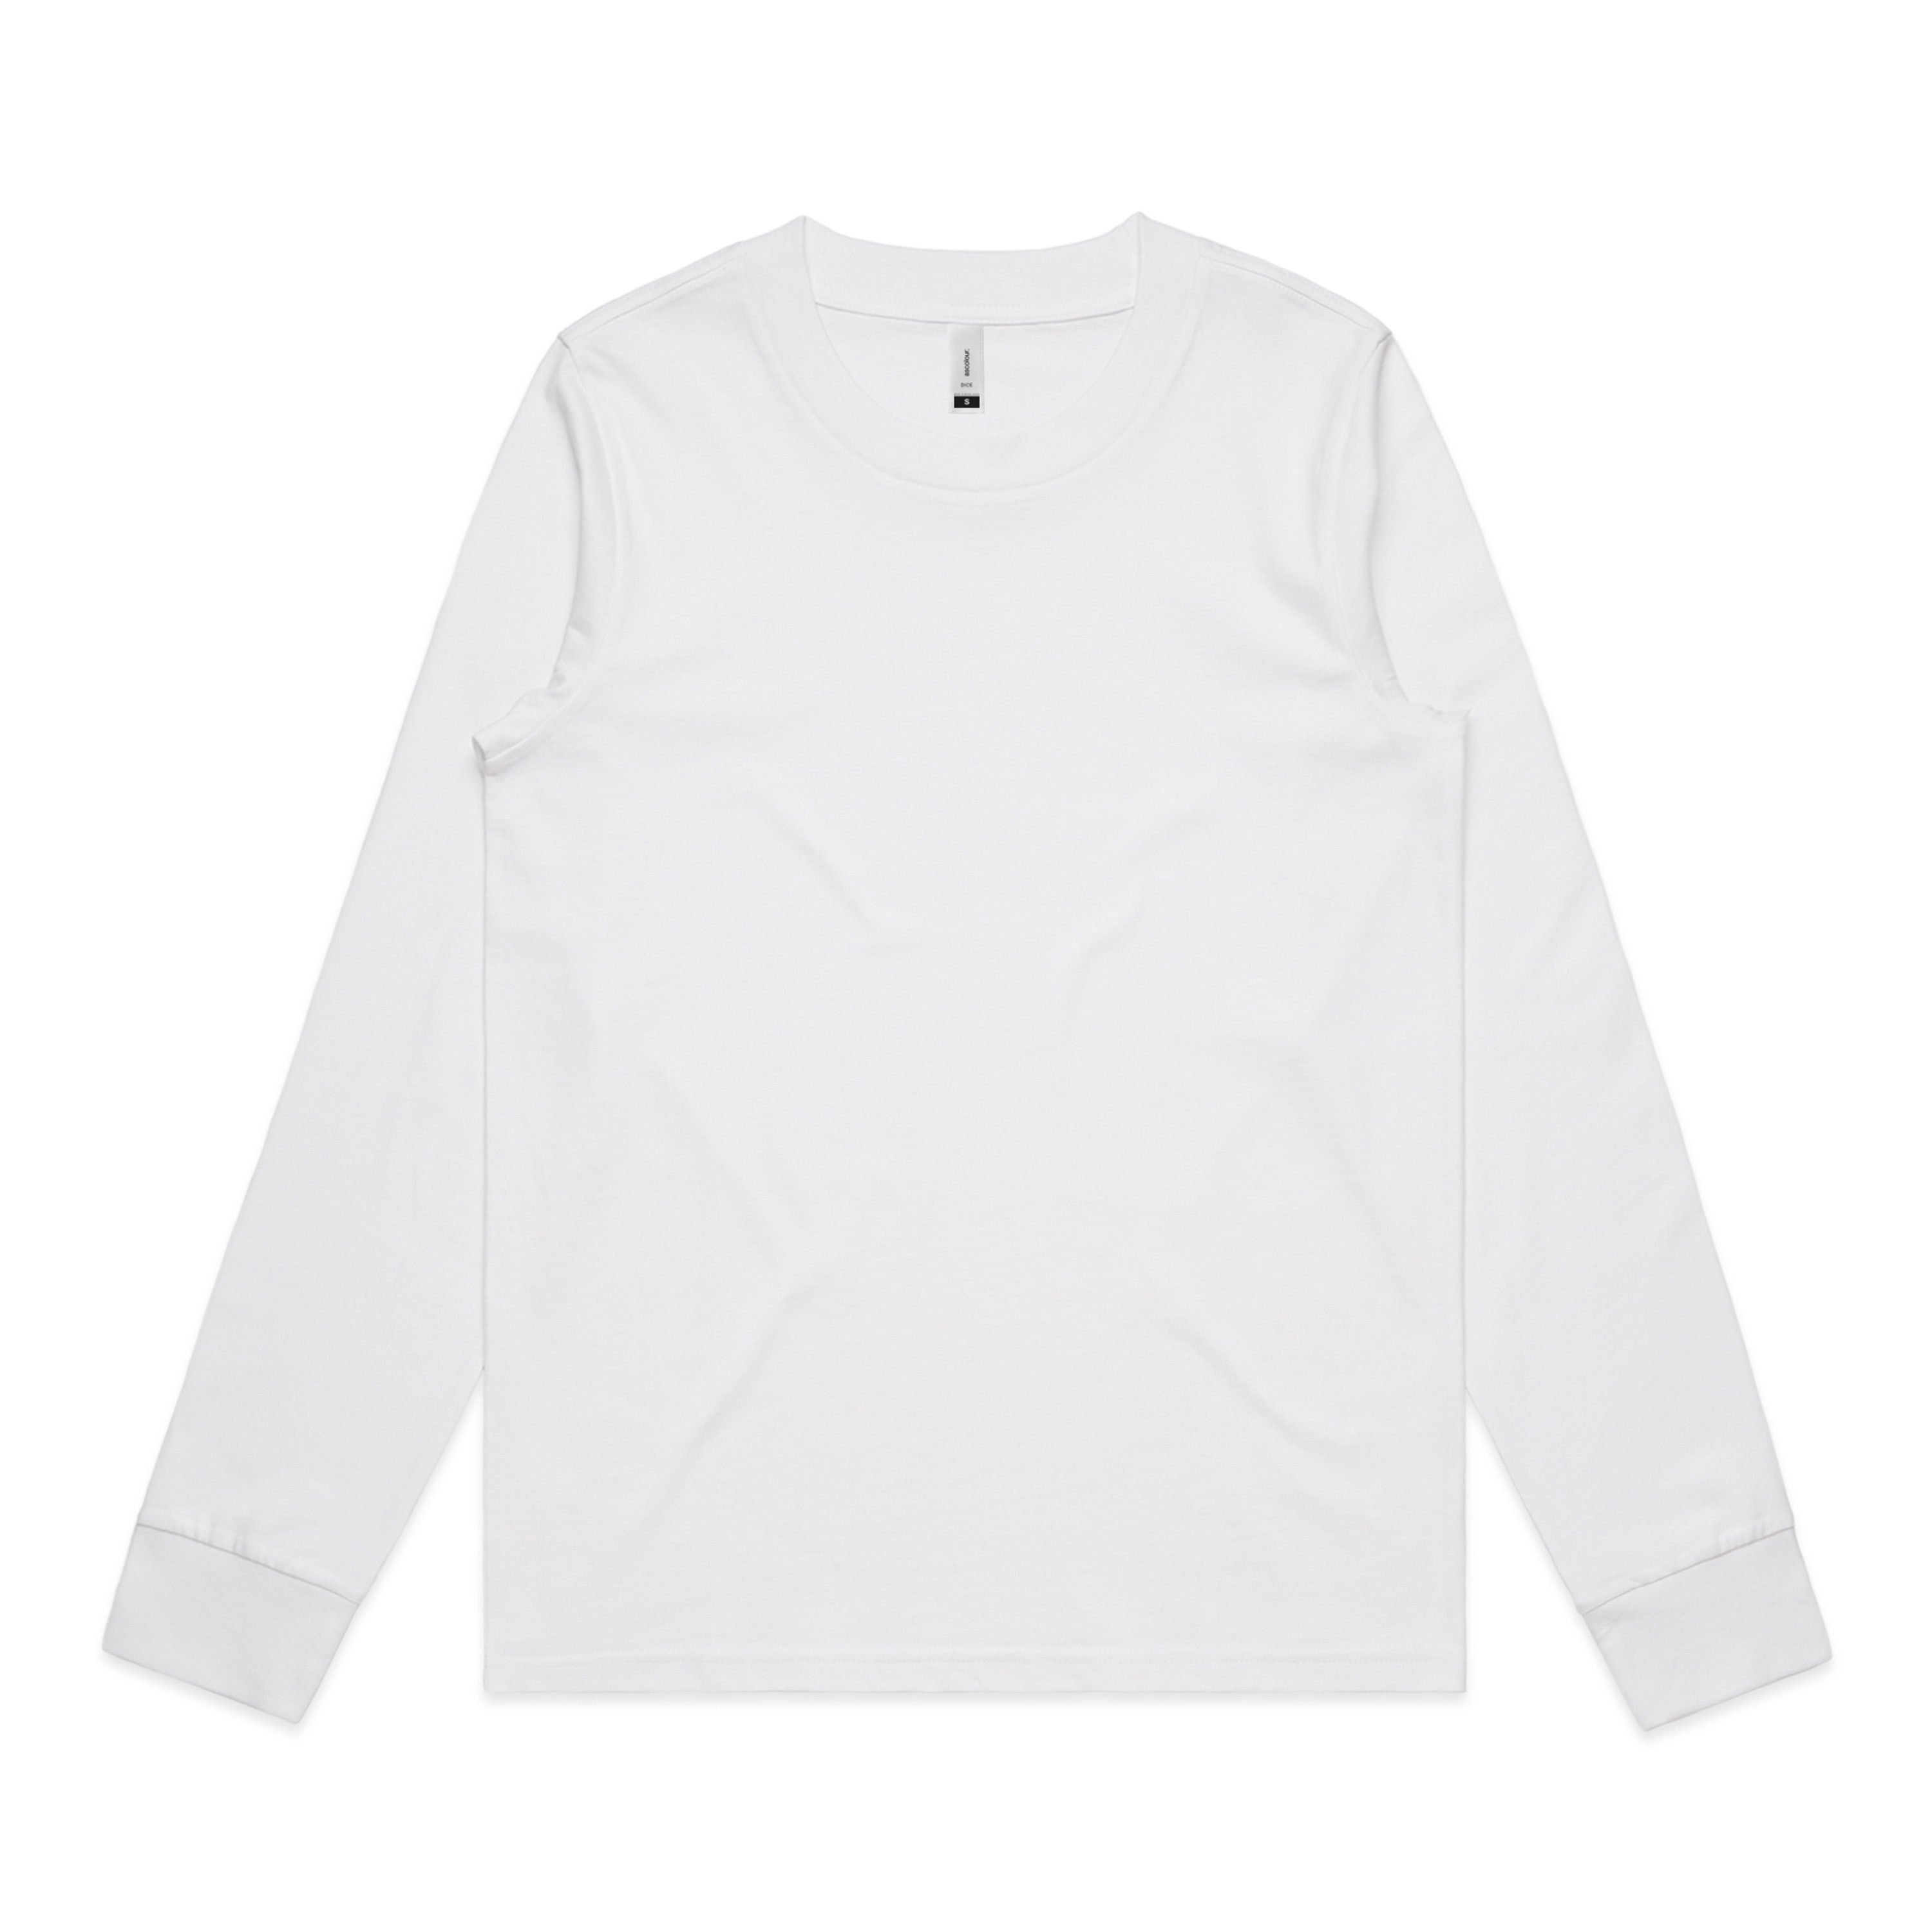 Wo's Dice L/S Tee - 4056S - AS Colour NZ